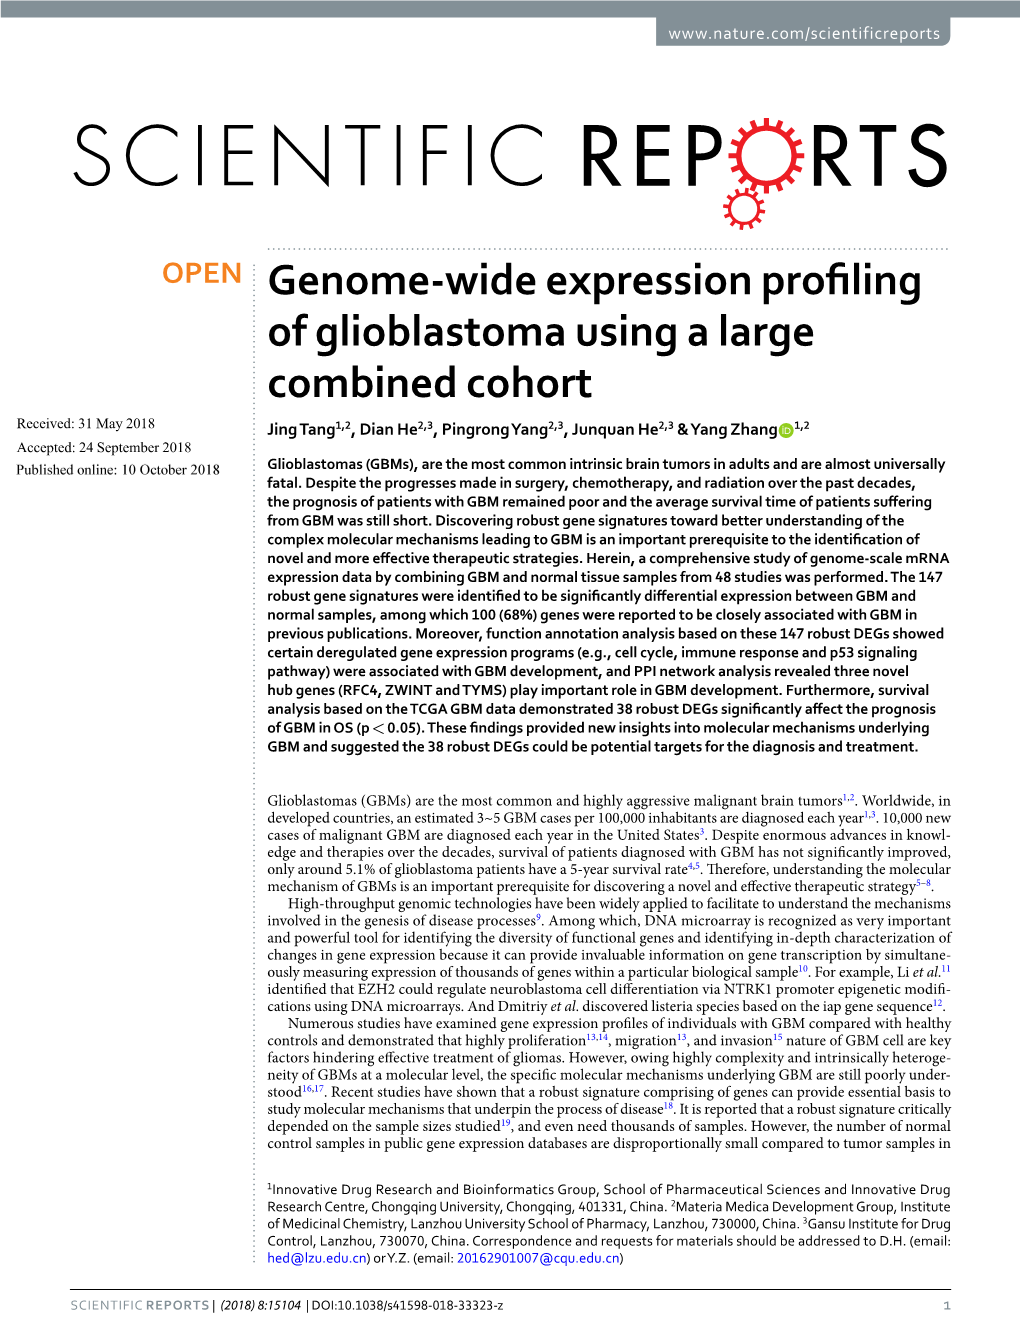 Genome-Wide Expression Profiling of Glioblastoma Using a Large